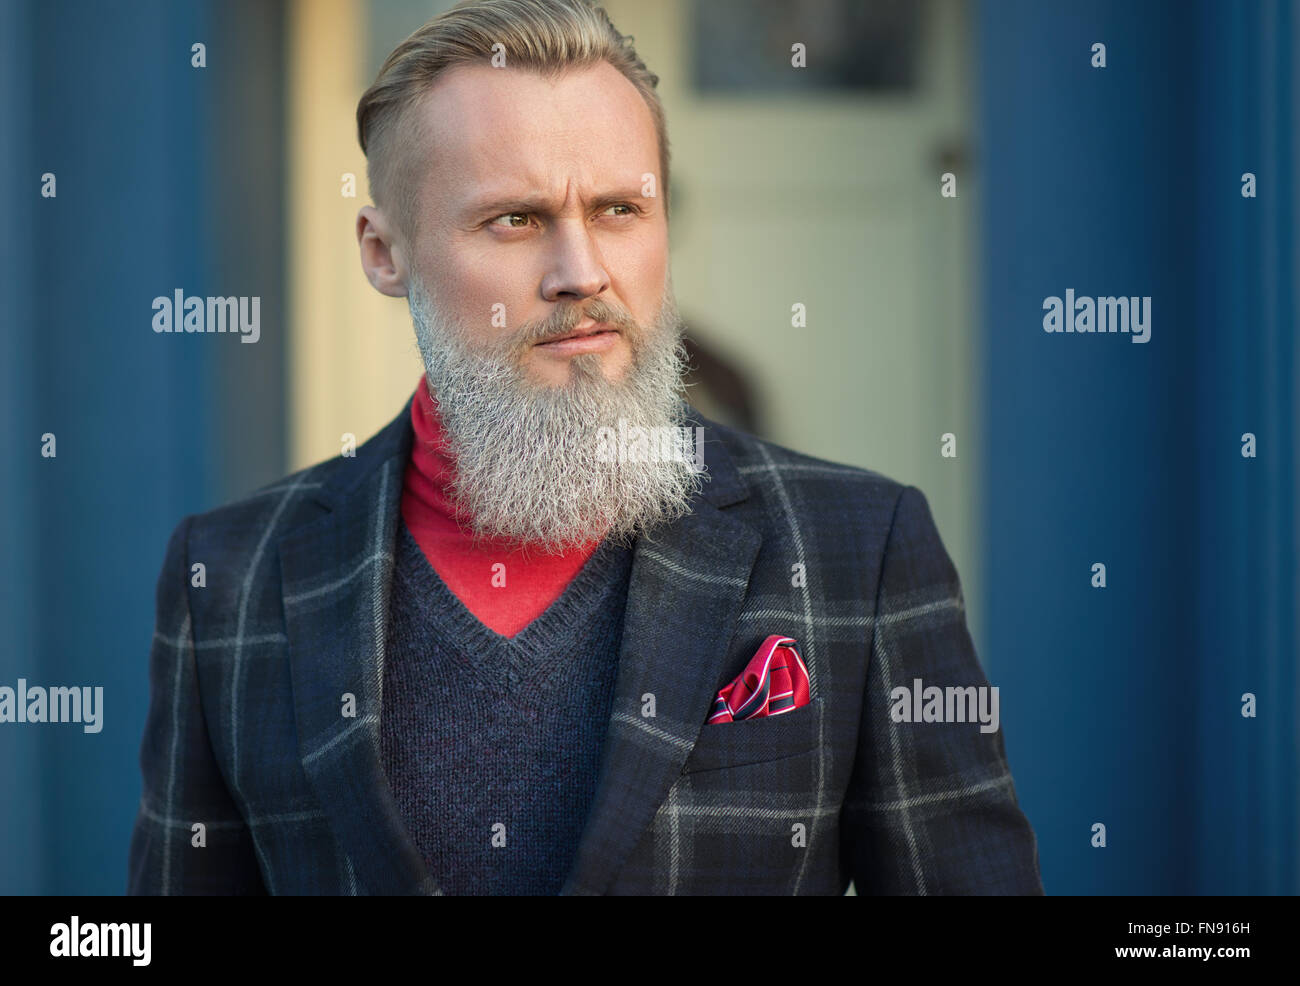 Portrait of a hipster man Stock Photo